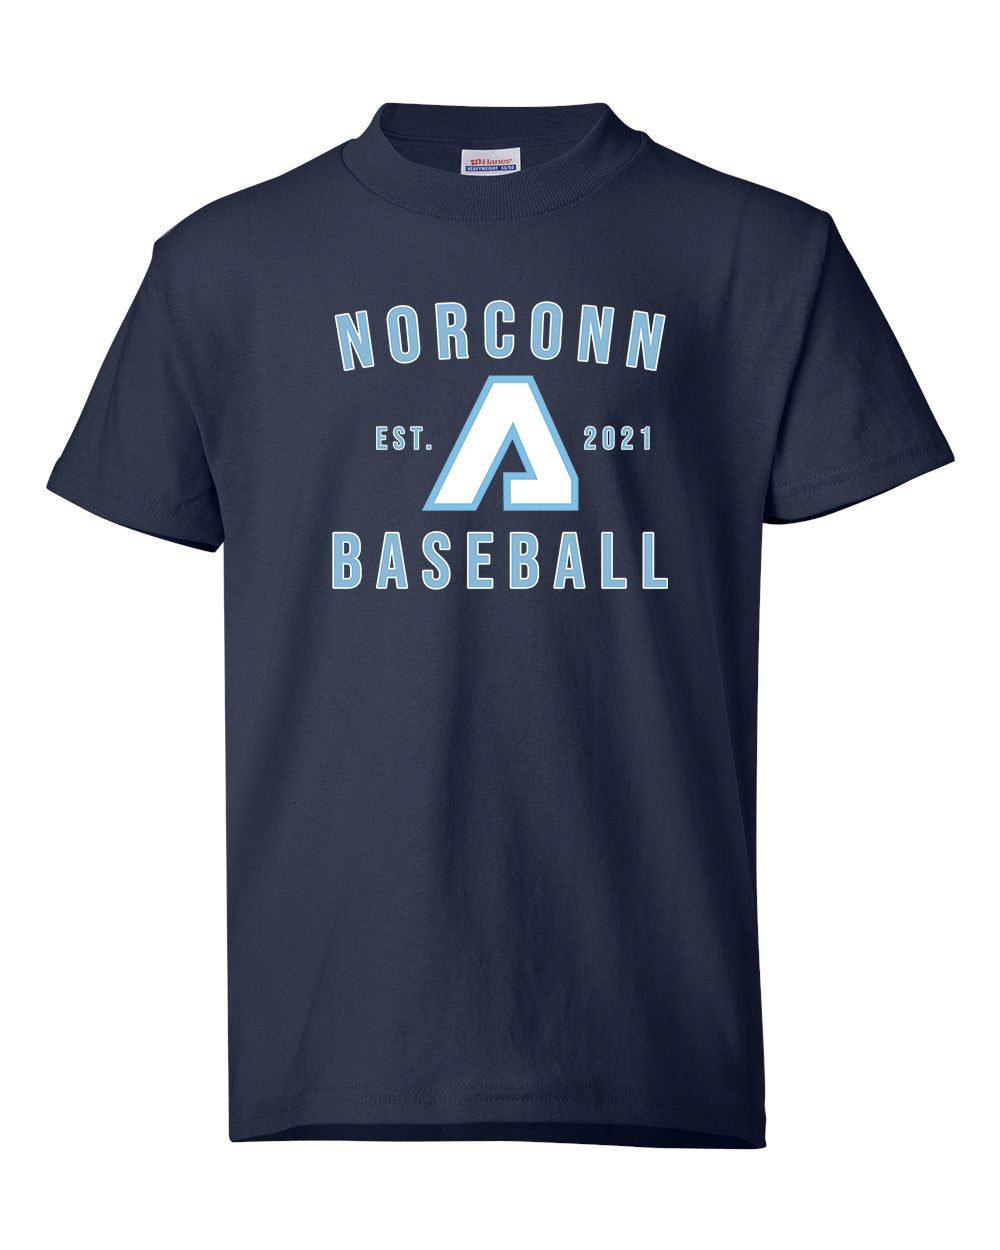 NorConn Youth T Shirt 50/50 Blend - 29BR (color options available)